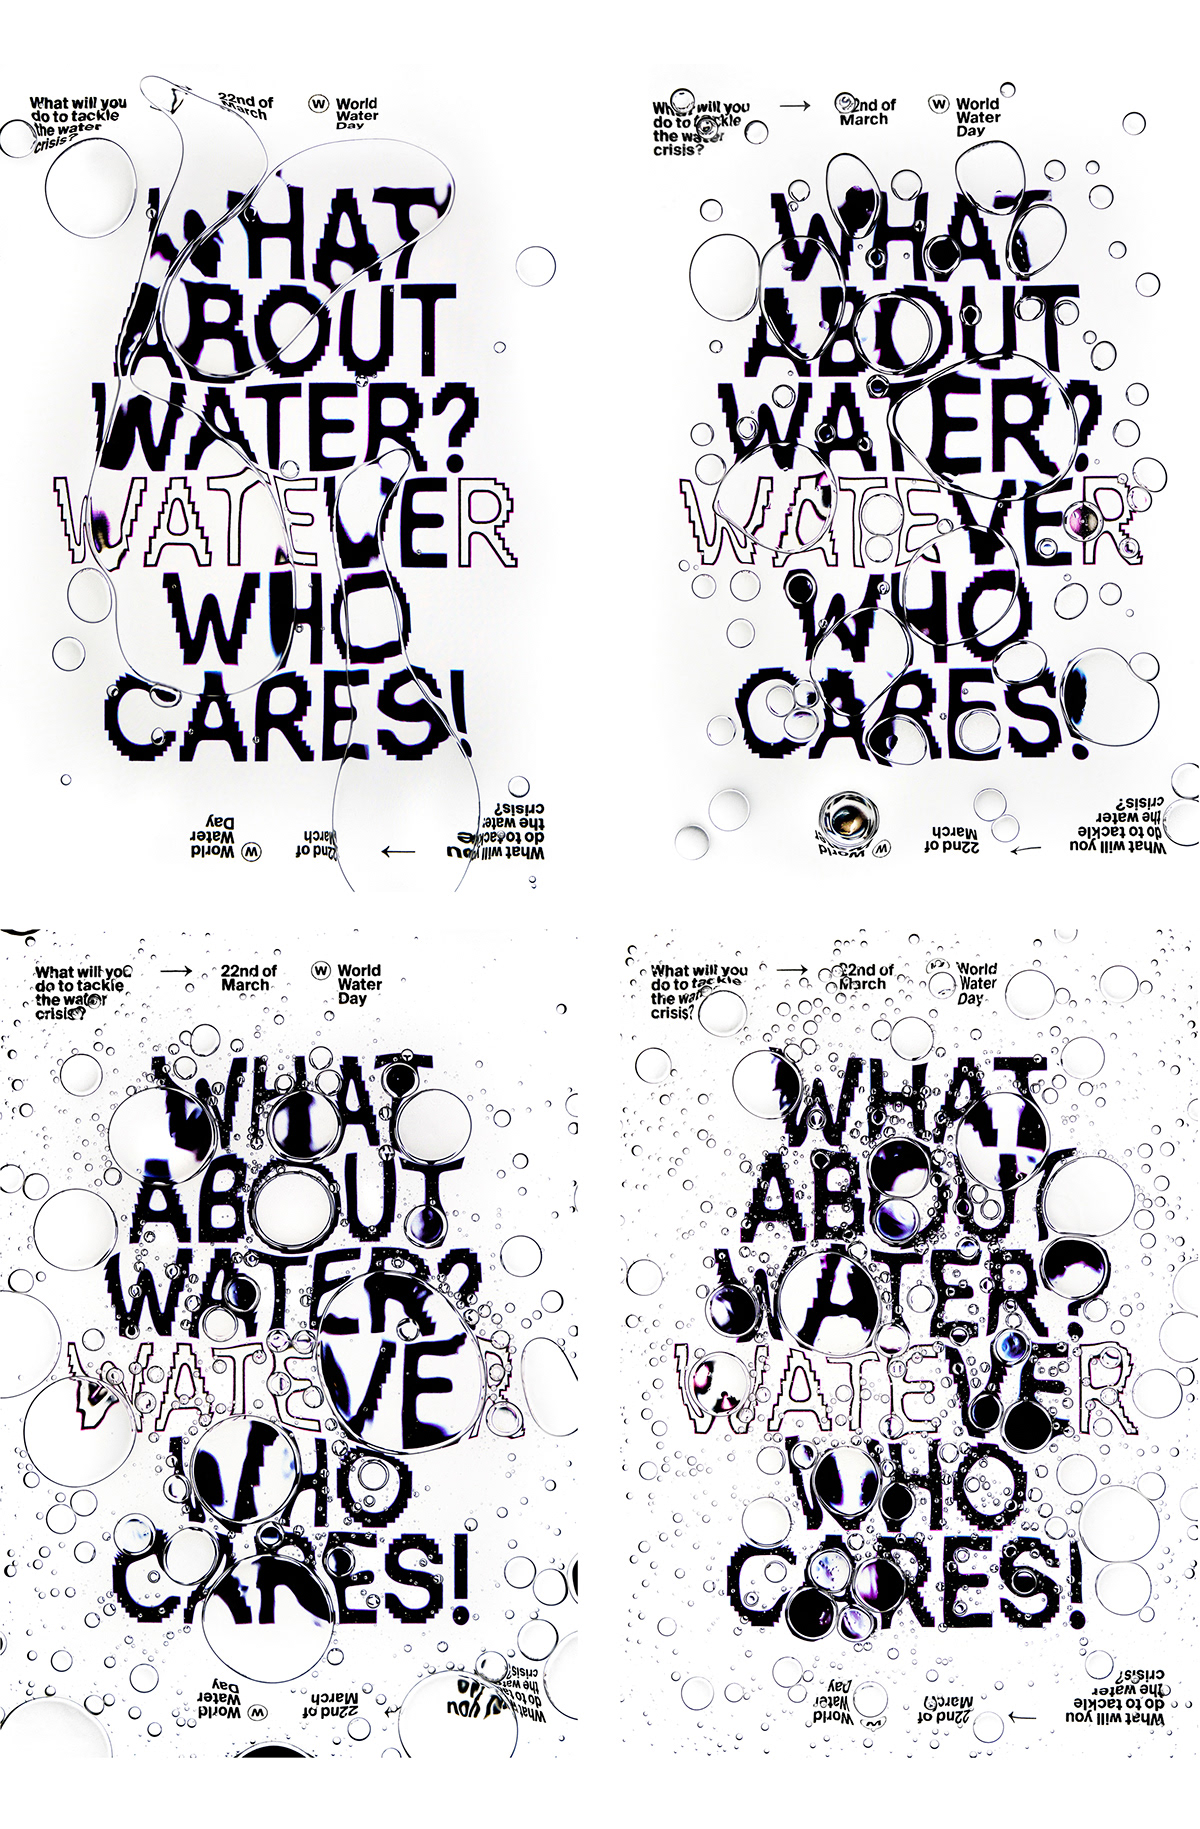 water World Water Day digital poster oil and water distortion typography   reflection artwork bw